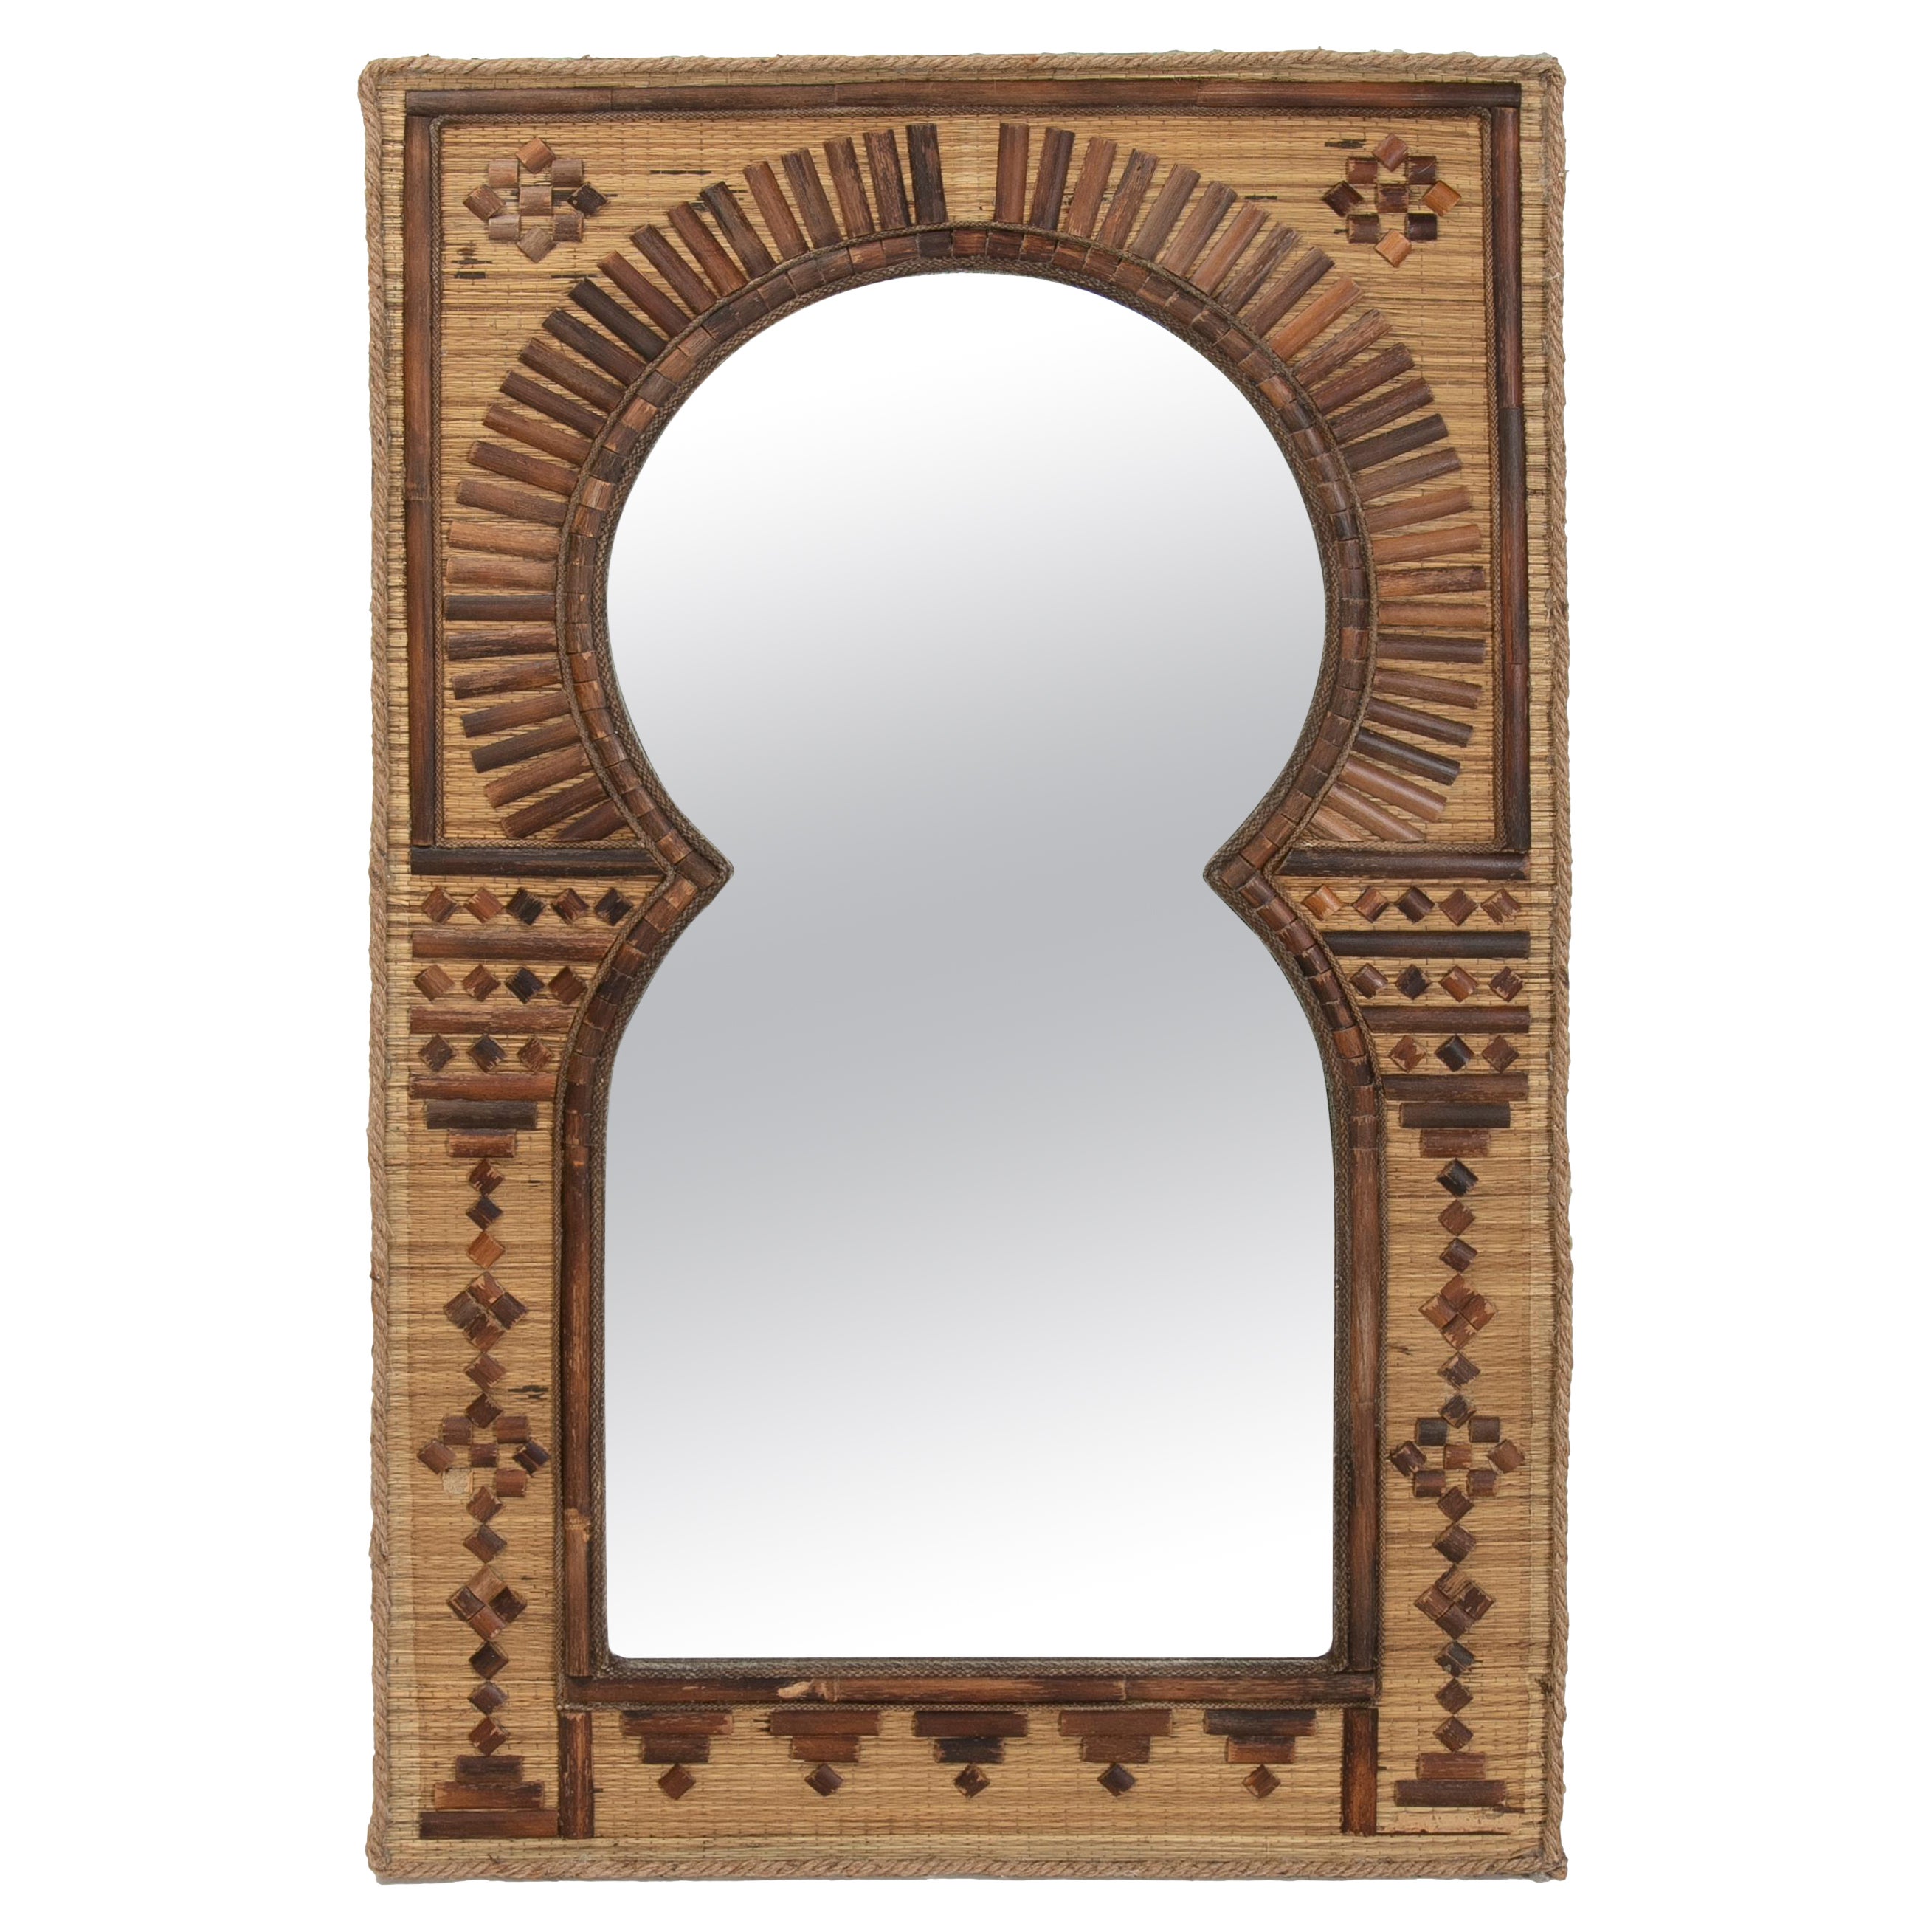 1980s Bamboo, Straw and Rope Mirror in the Shape of a Typical Muslim Arch For Sale